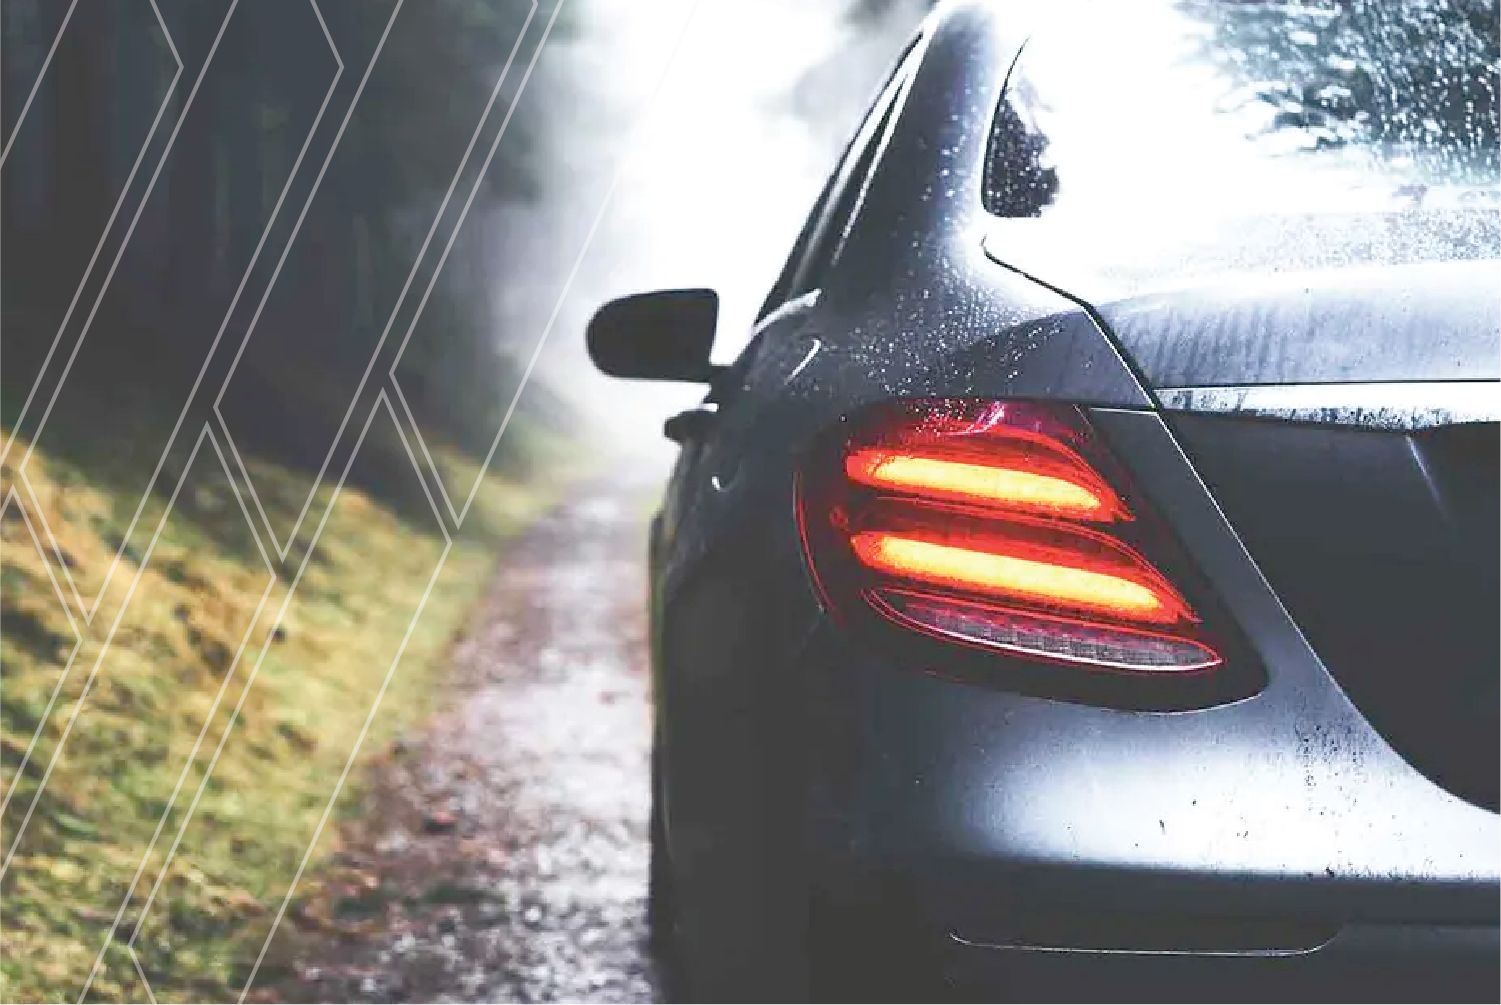 Is your car ready to take on the rainy season? Get all the help, tips, and details here.